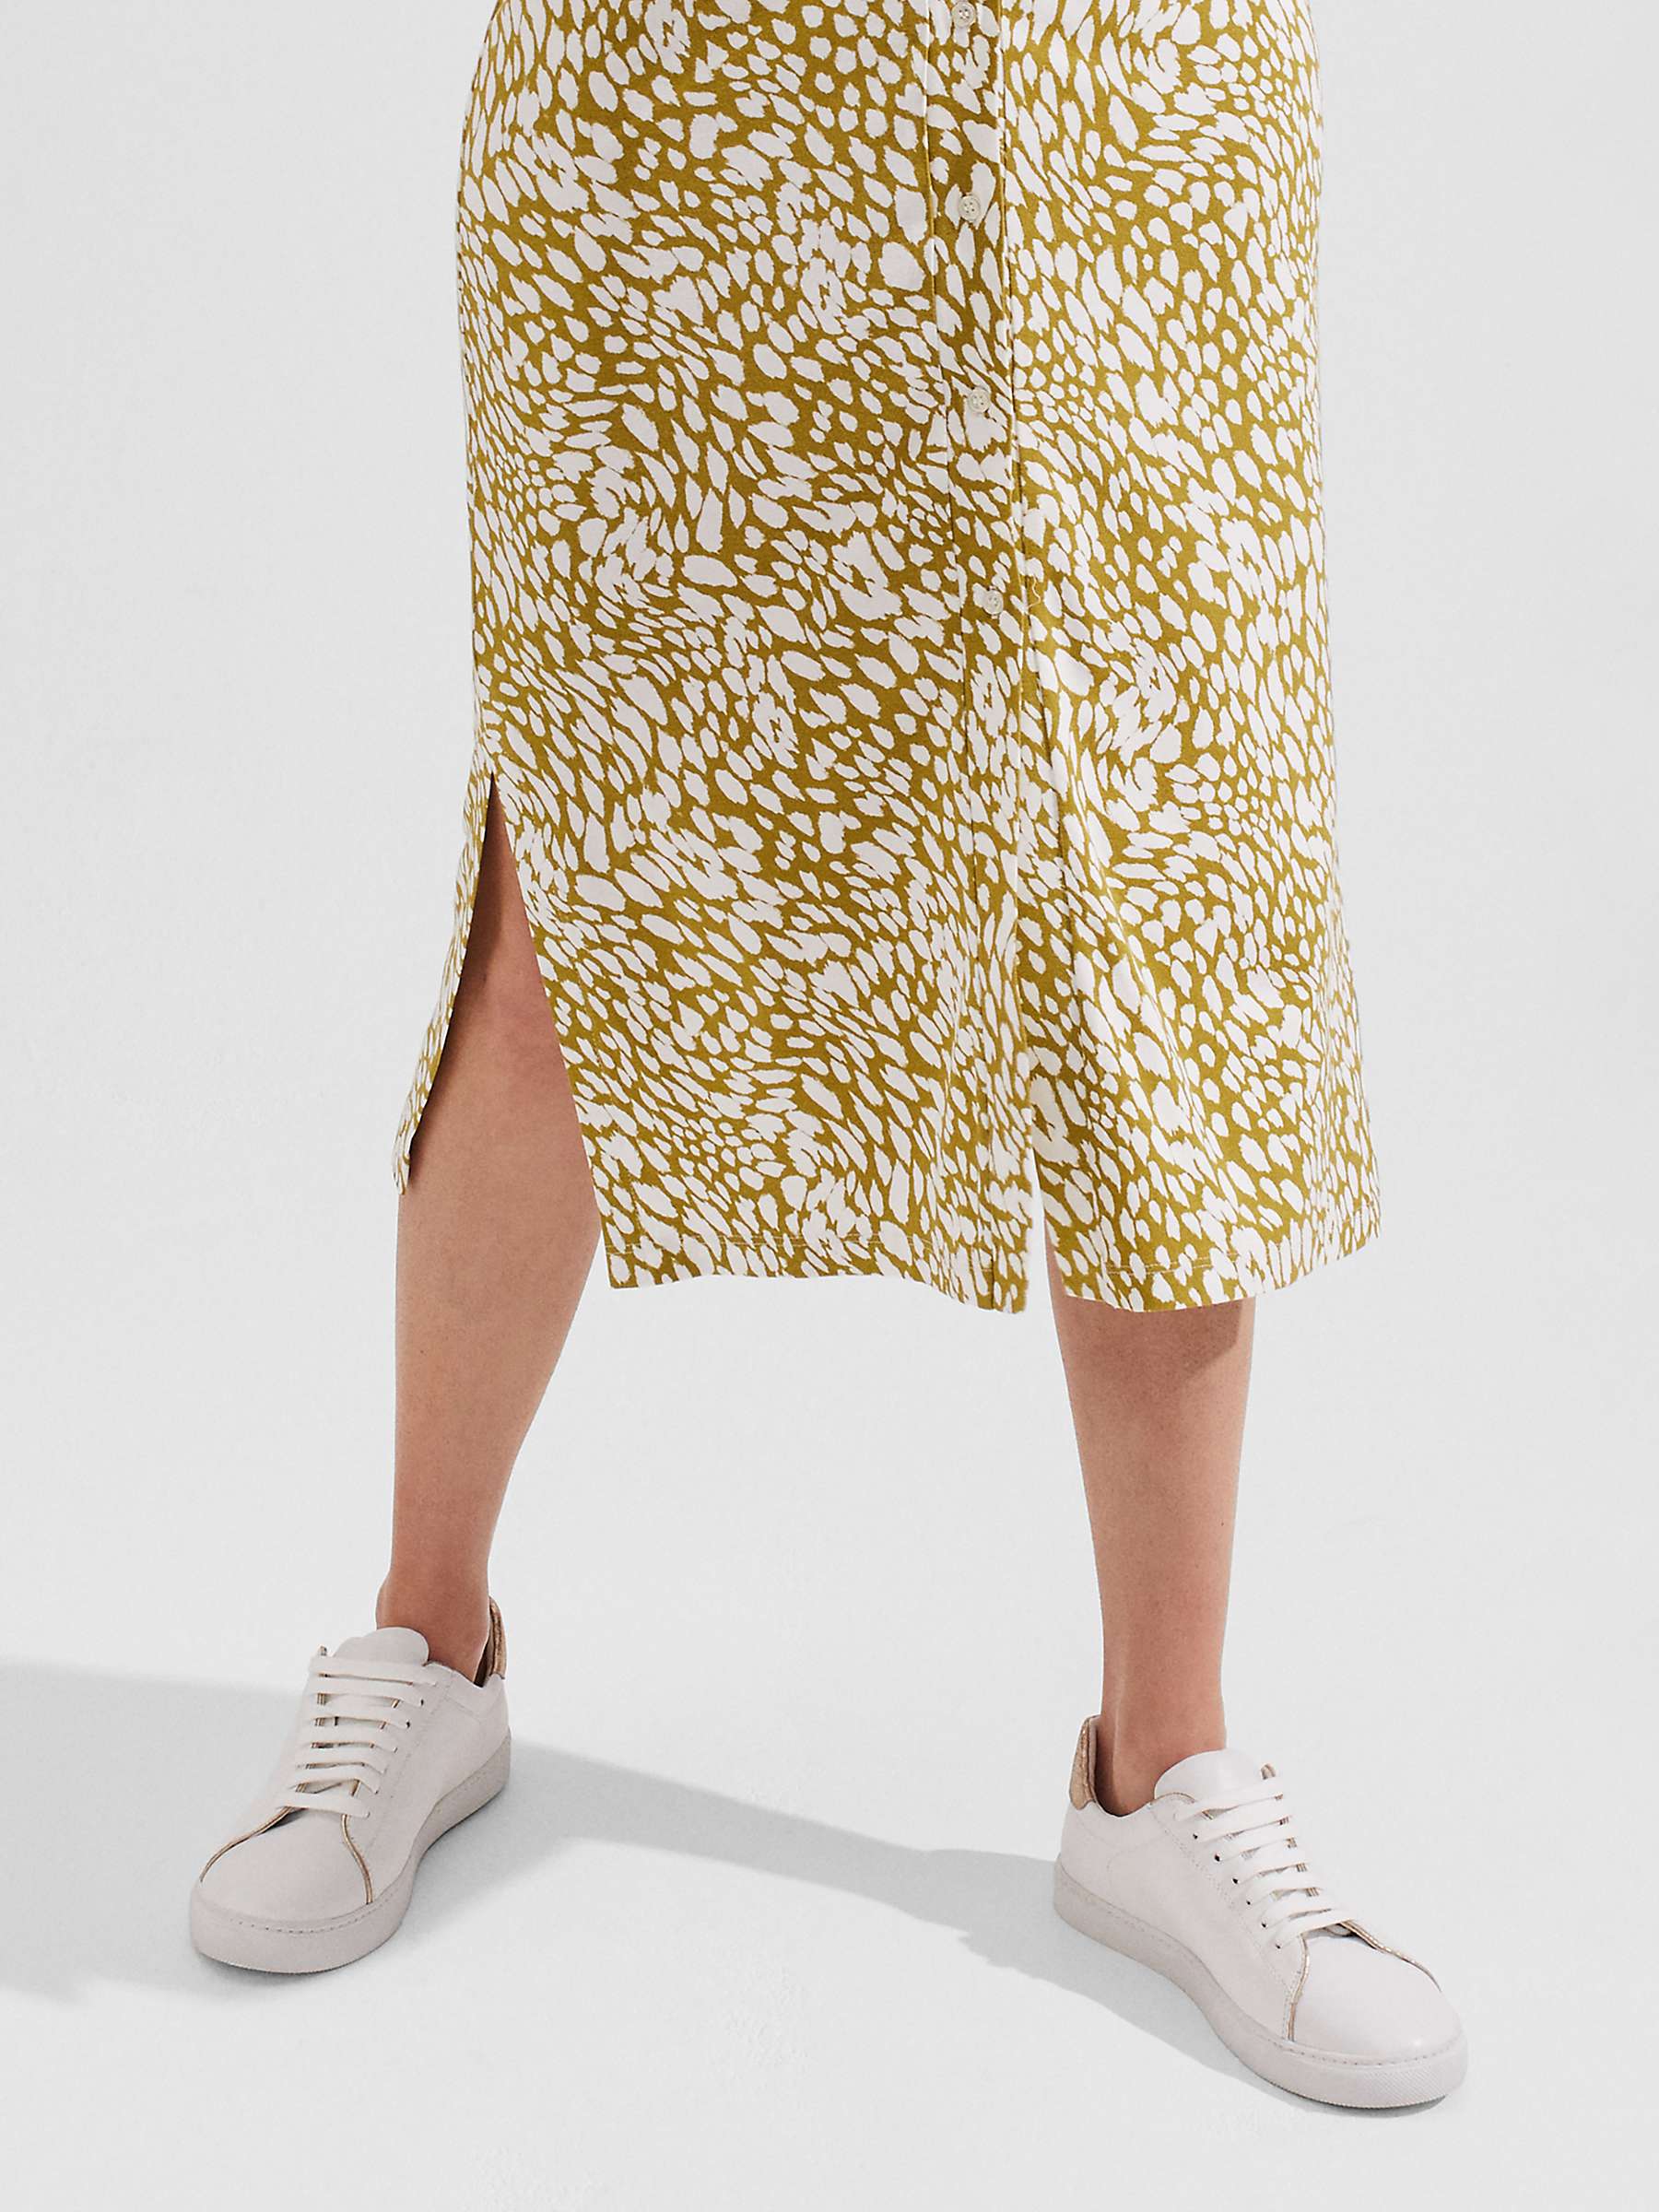 Buy Hobbs Hatty Abstract Print Jersey Midi Dress, Mid Olive/Ivory Online at johnlewis.com